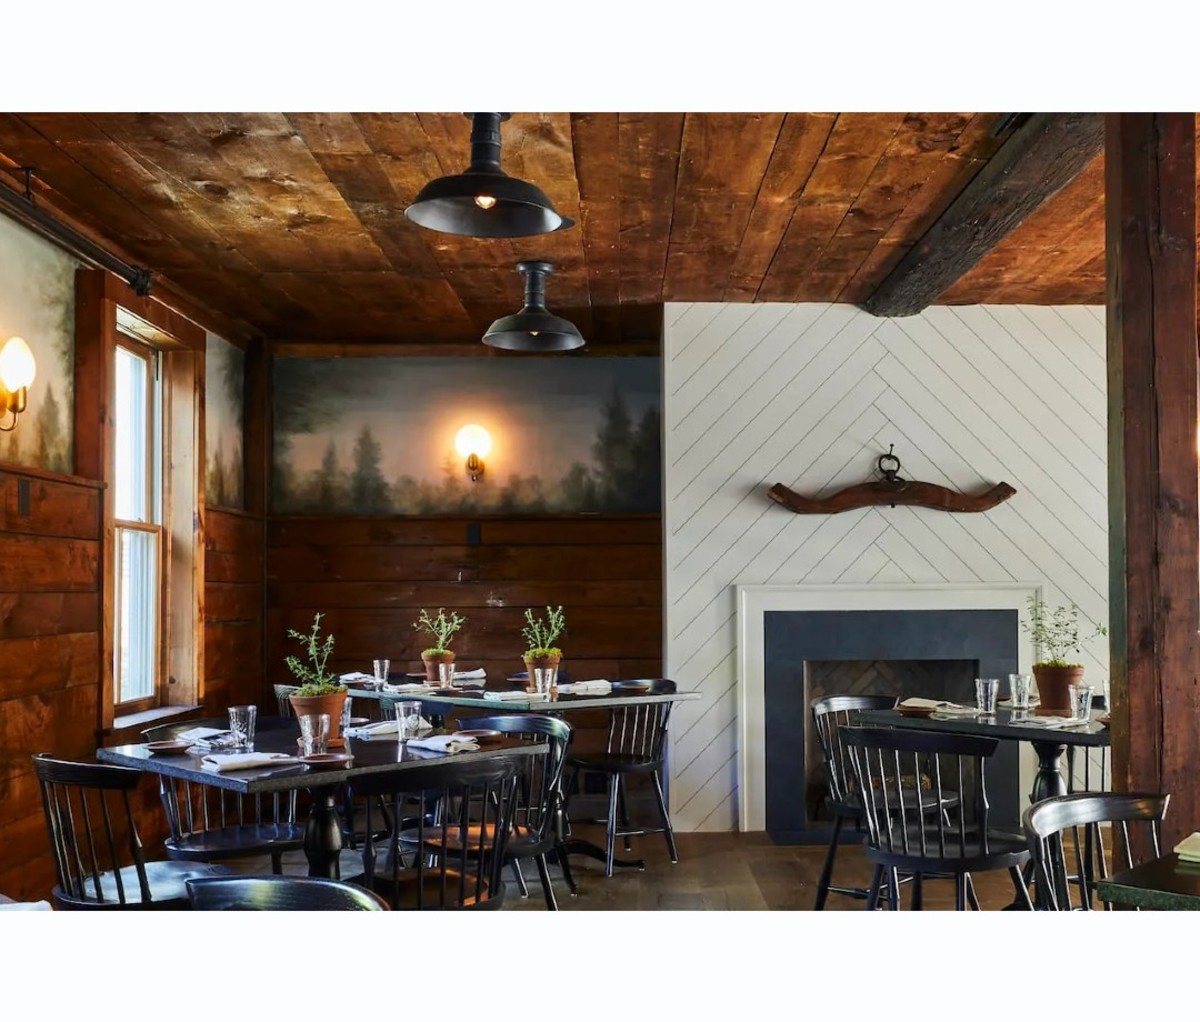 Interior of restaurant dining room with wood walls